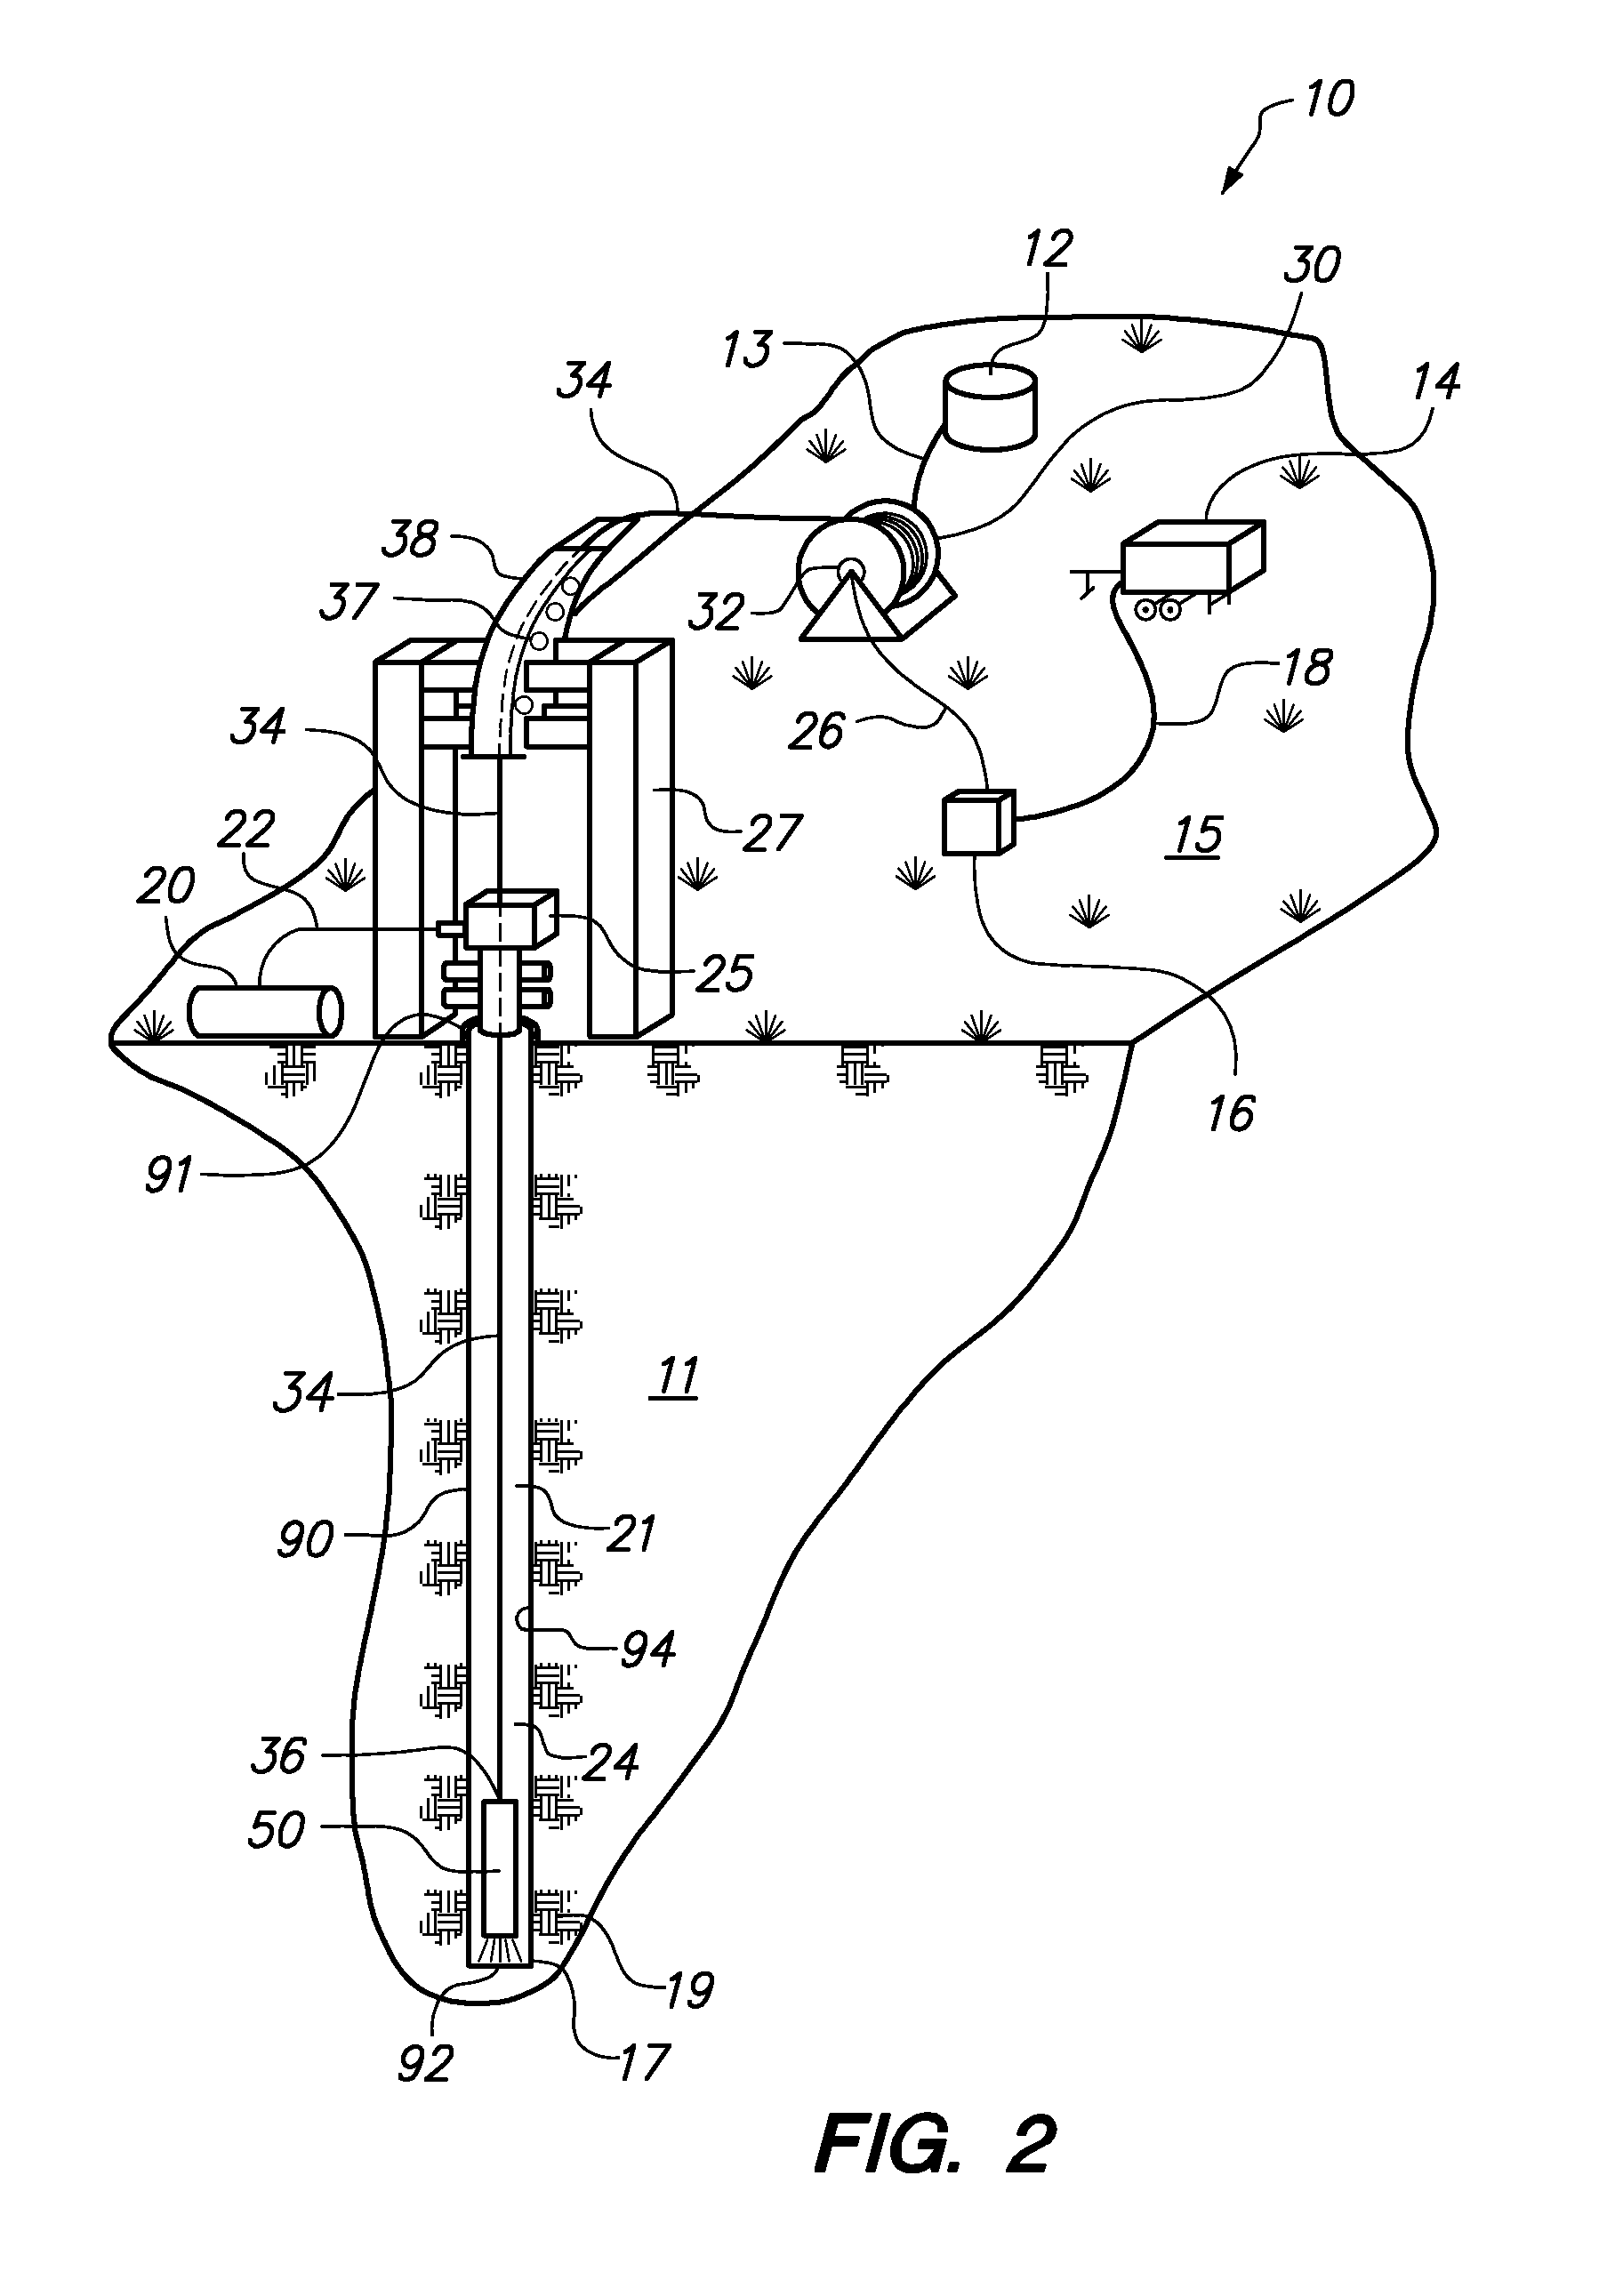 Method to control the environment in a laser path